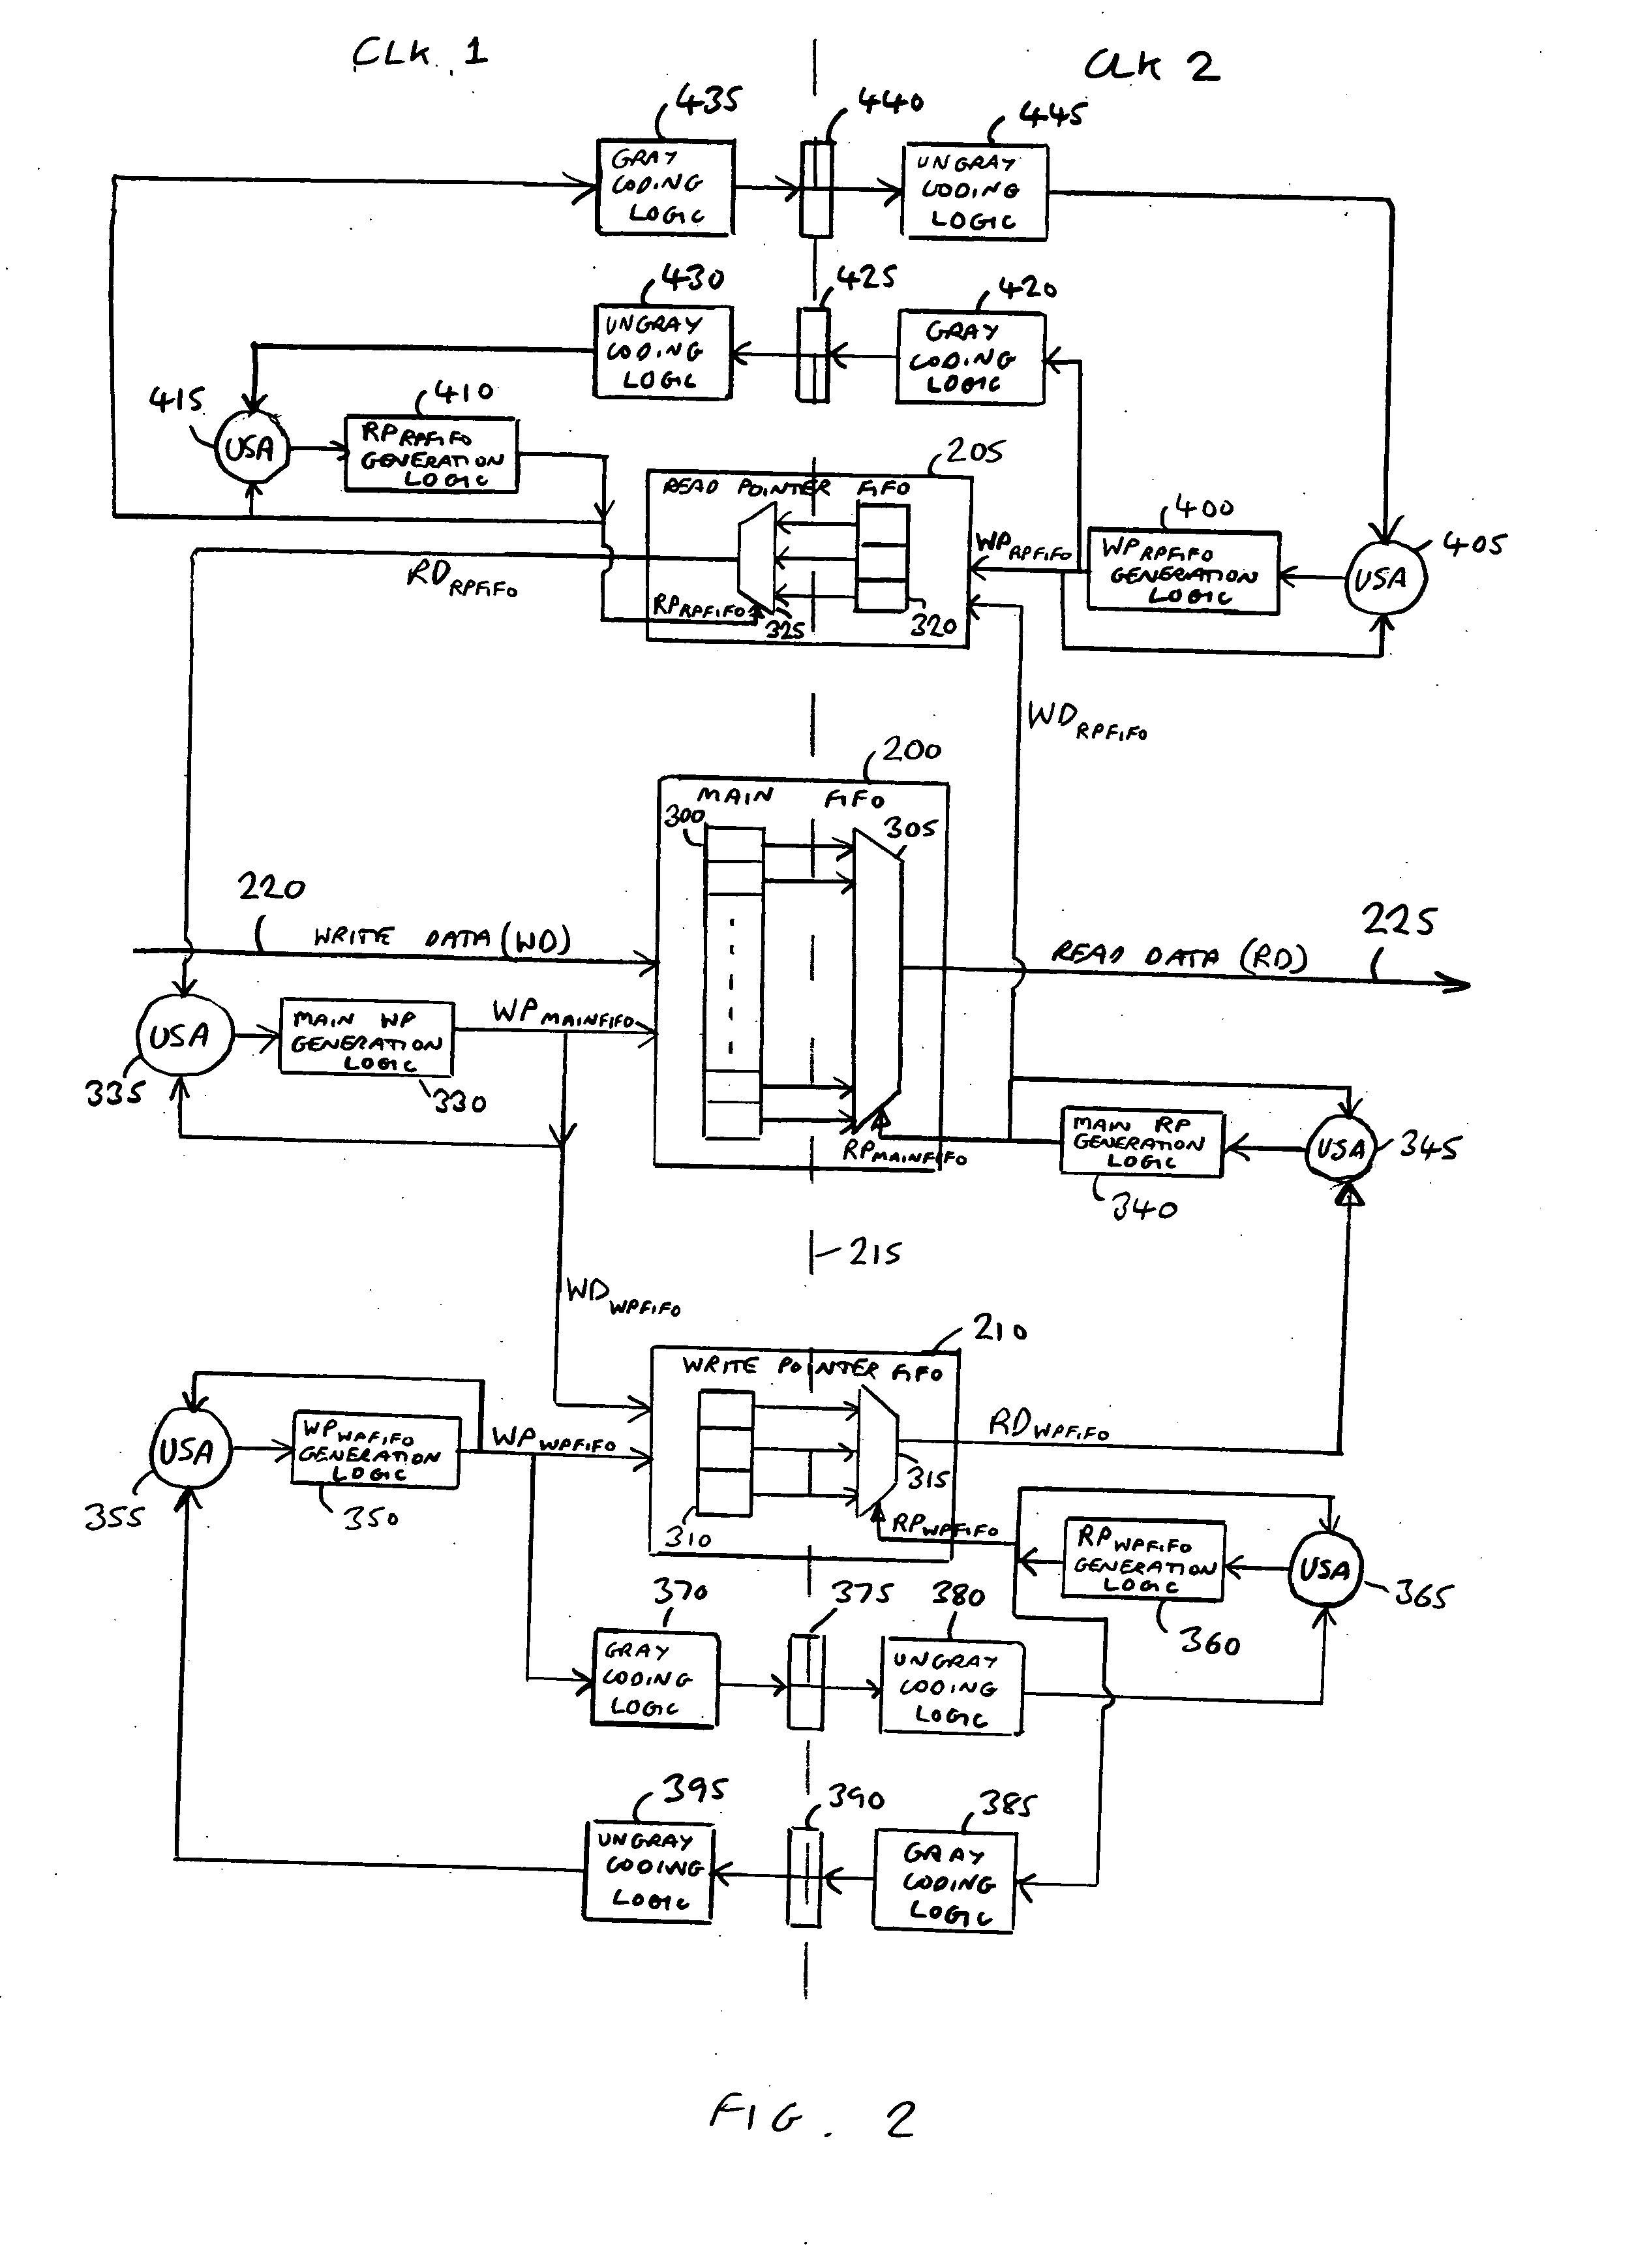 Asynchronous FIFO apparatus and method for passing data between a first clock domain and a second clock domain of a data processing apparatus